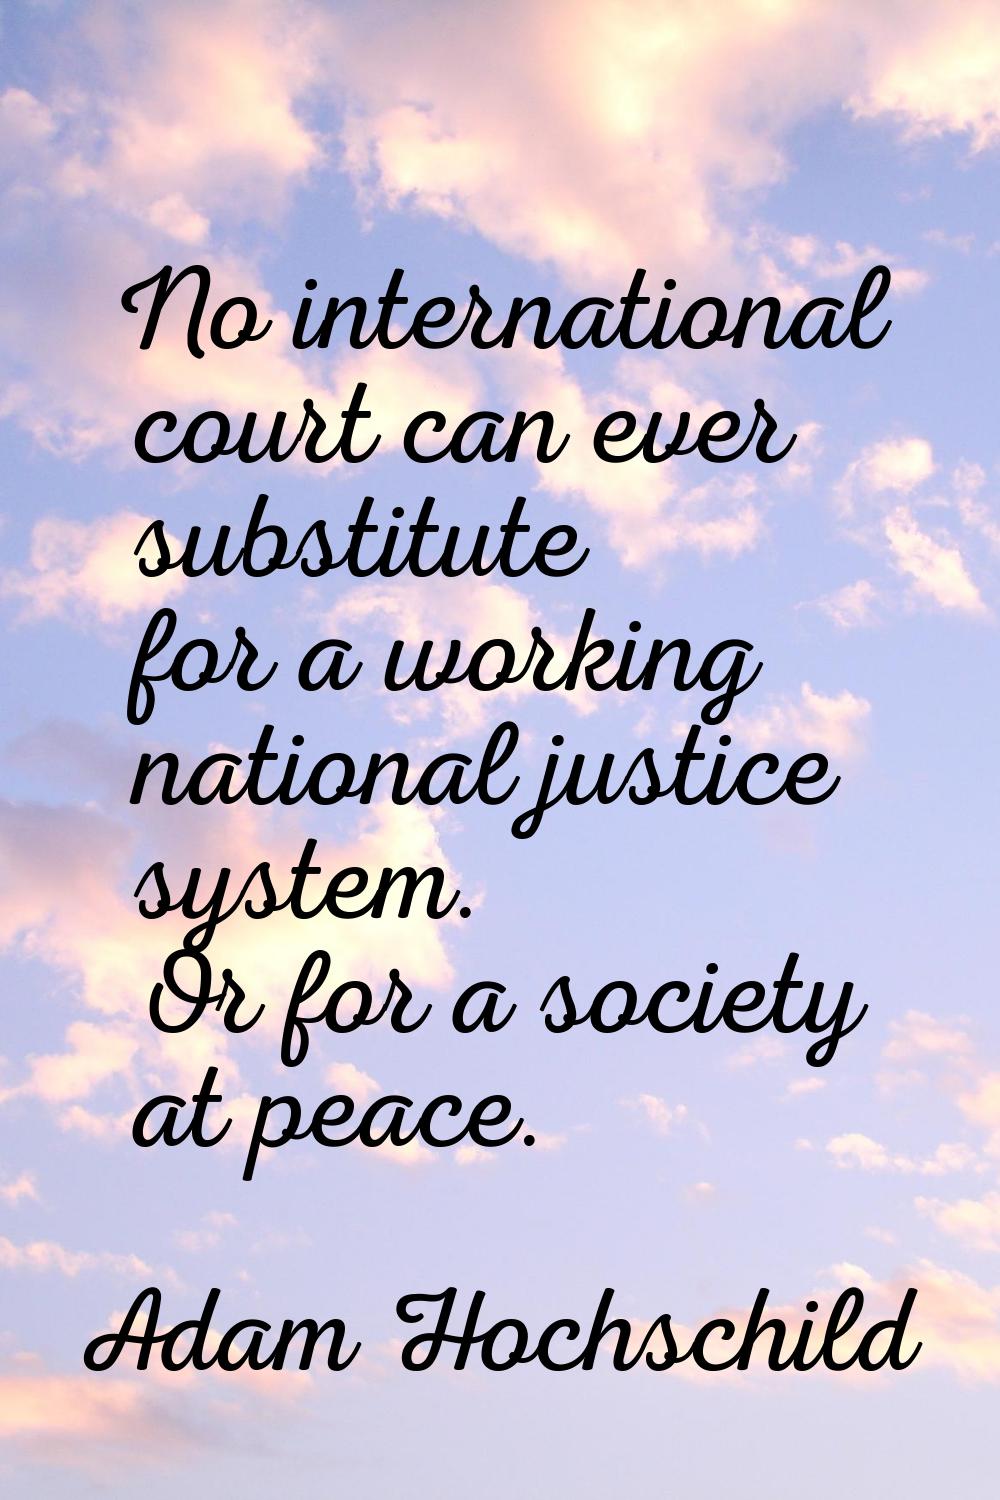 No international court can ever substitute for a working national justice system. Or for a society 